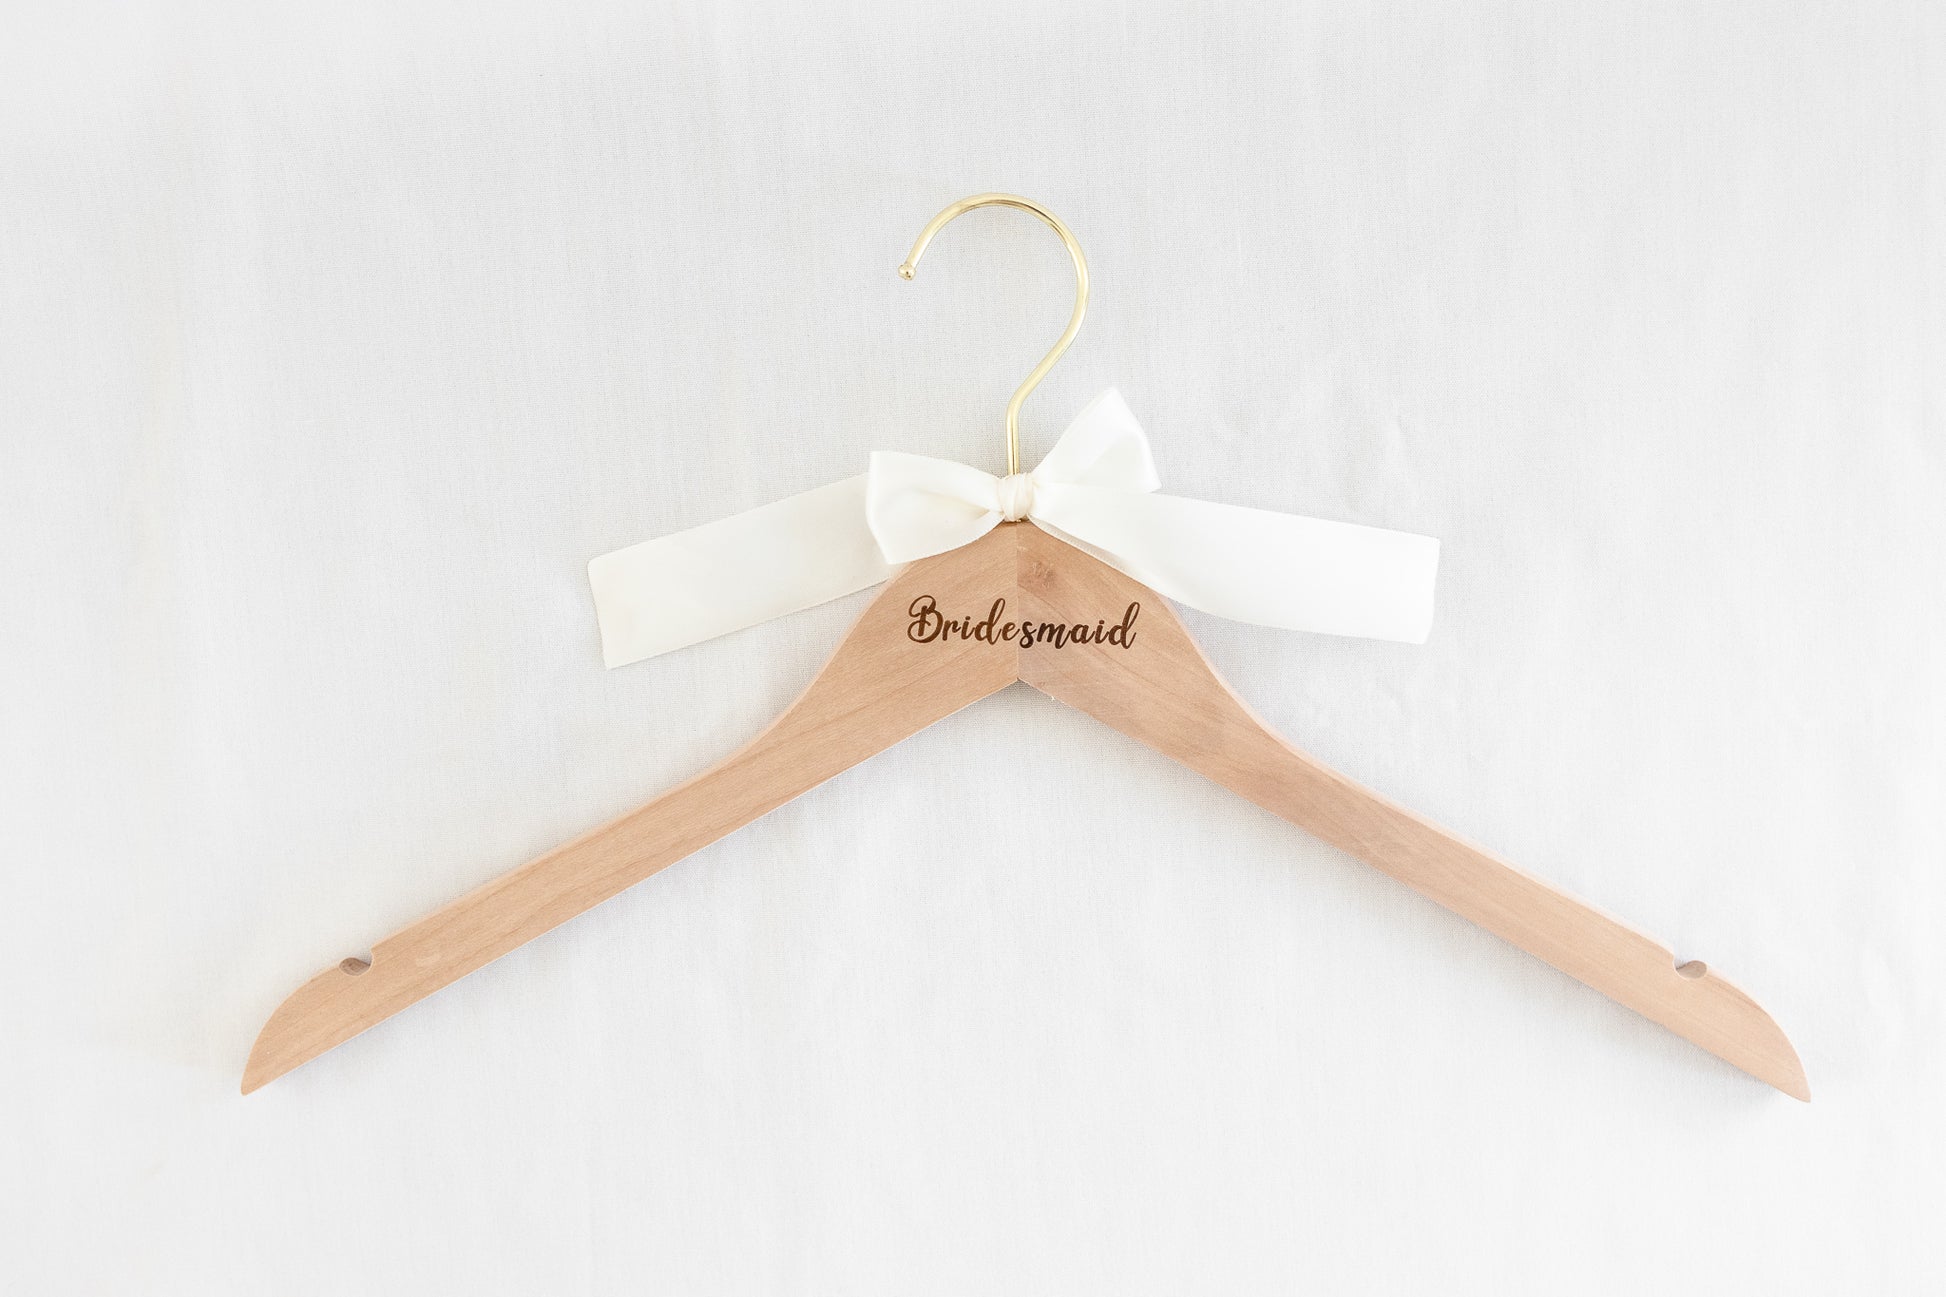 Wooden bridesmaid hanger with personalized name